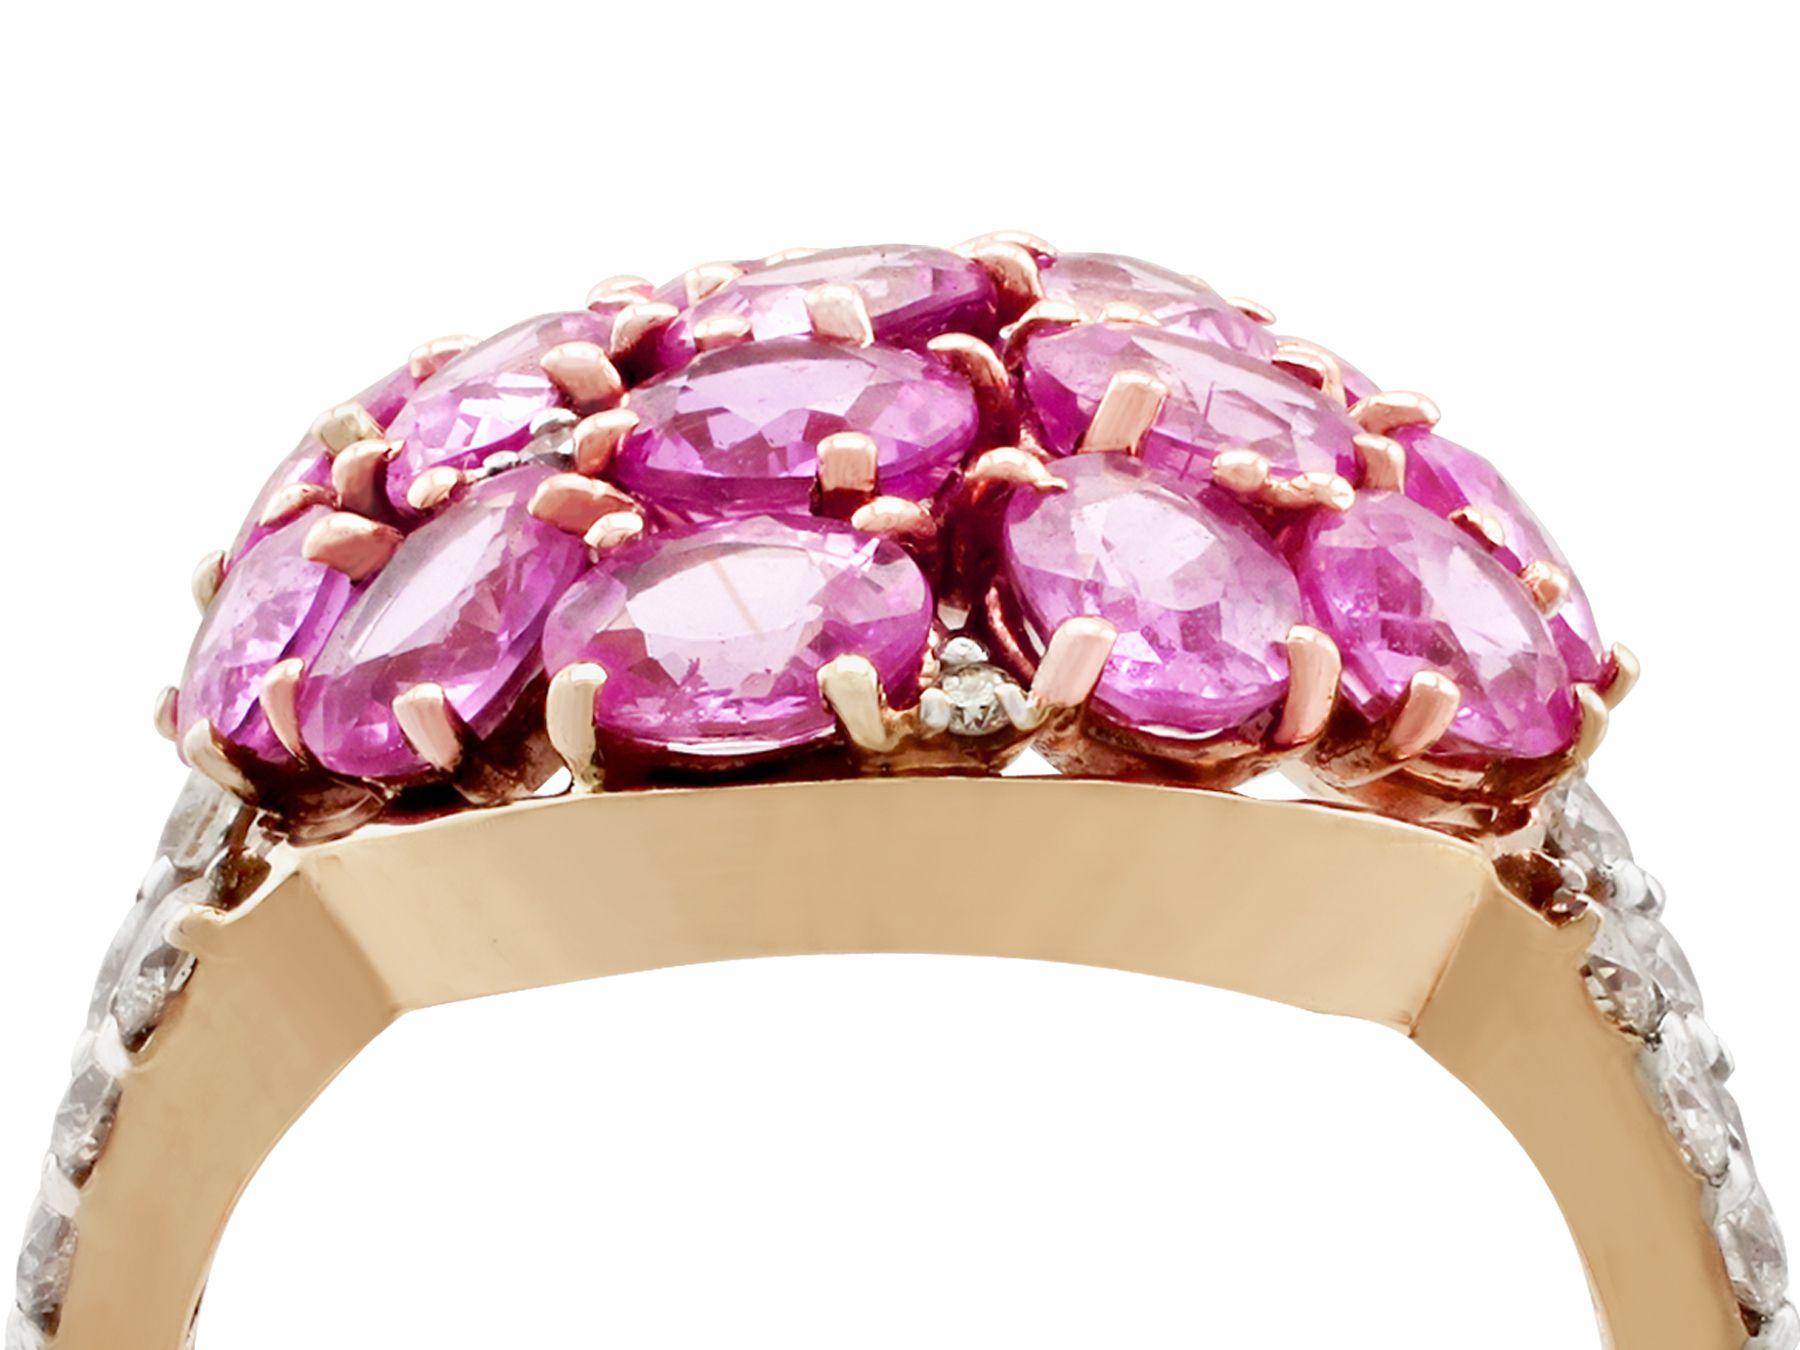 An impressive 3.99 carat pink sapphire and 0.40 carat diamond, 18 karat yellow and white gold cluster ring; part of our diverse gemstone jewelry and estate jewelry collections.

This fine and impressive pink sapphire ring with diamonds has been